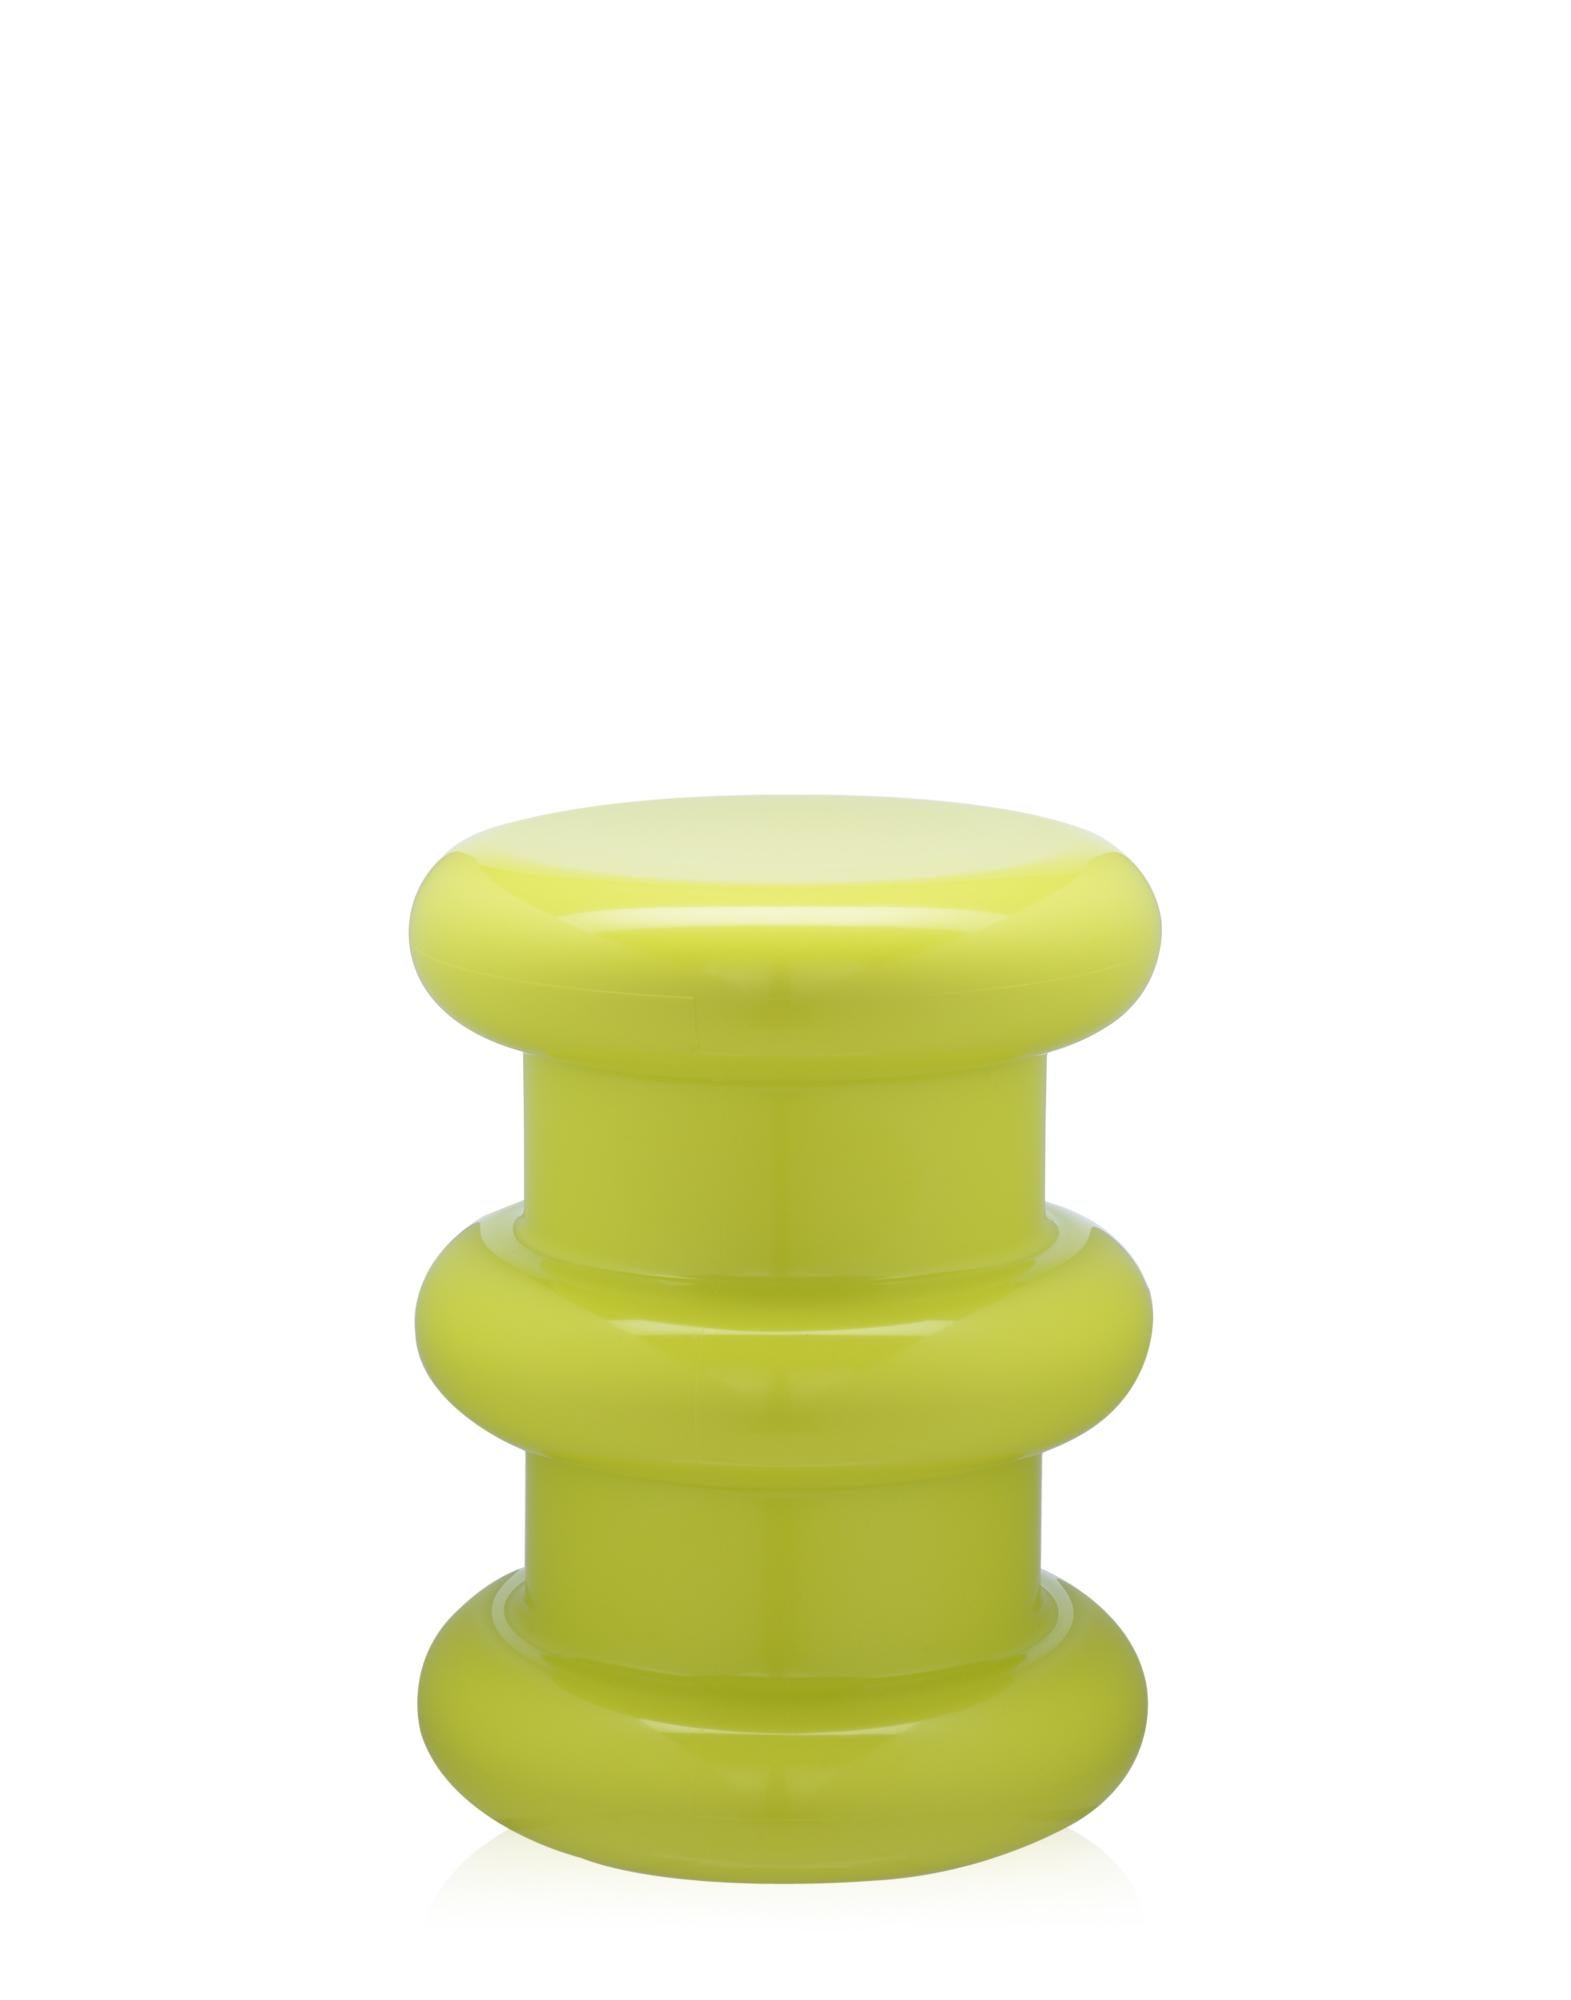 The Pilastro stool is part of the Kartell goes Sottsass, a tribute to Memphis collection, launched in 2015 in homage to design guru Ettore Sottsass. Pilastro, stands out for its architectural lines and is made from mass-colored thermoplastic techno